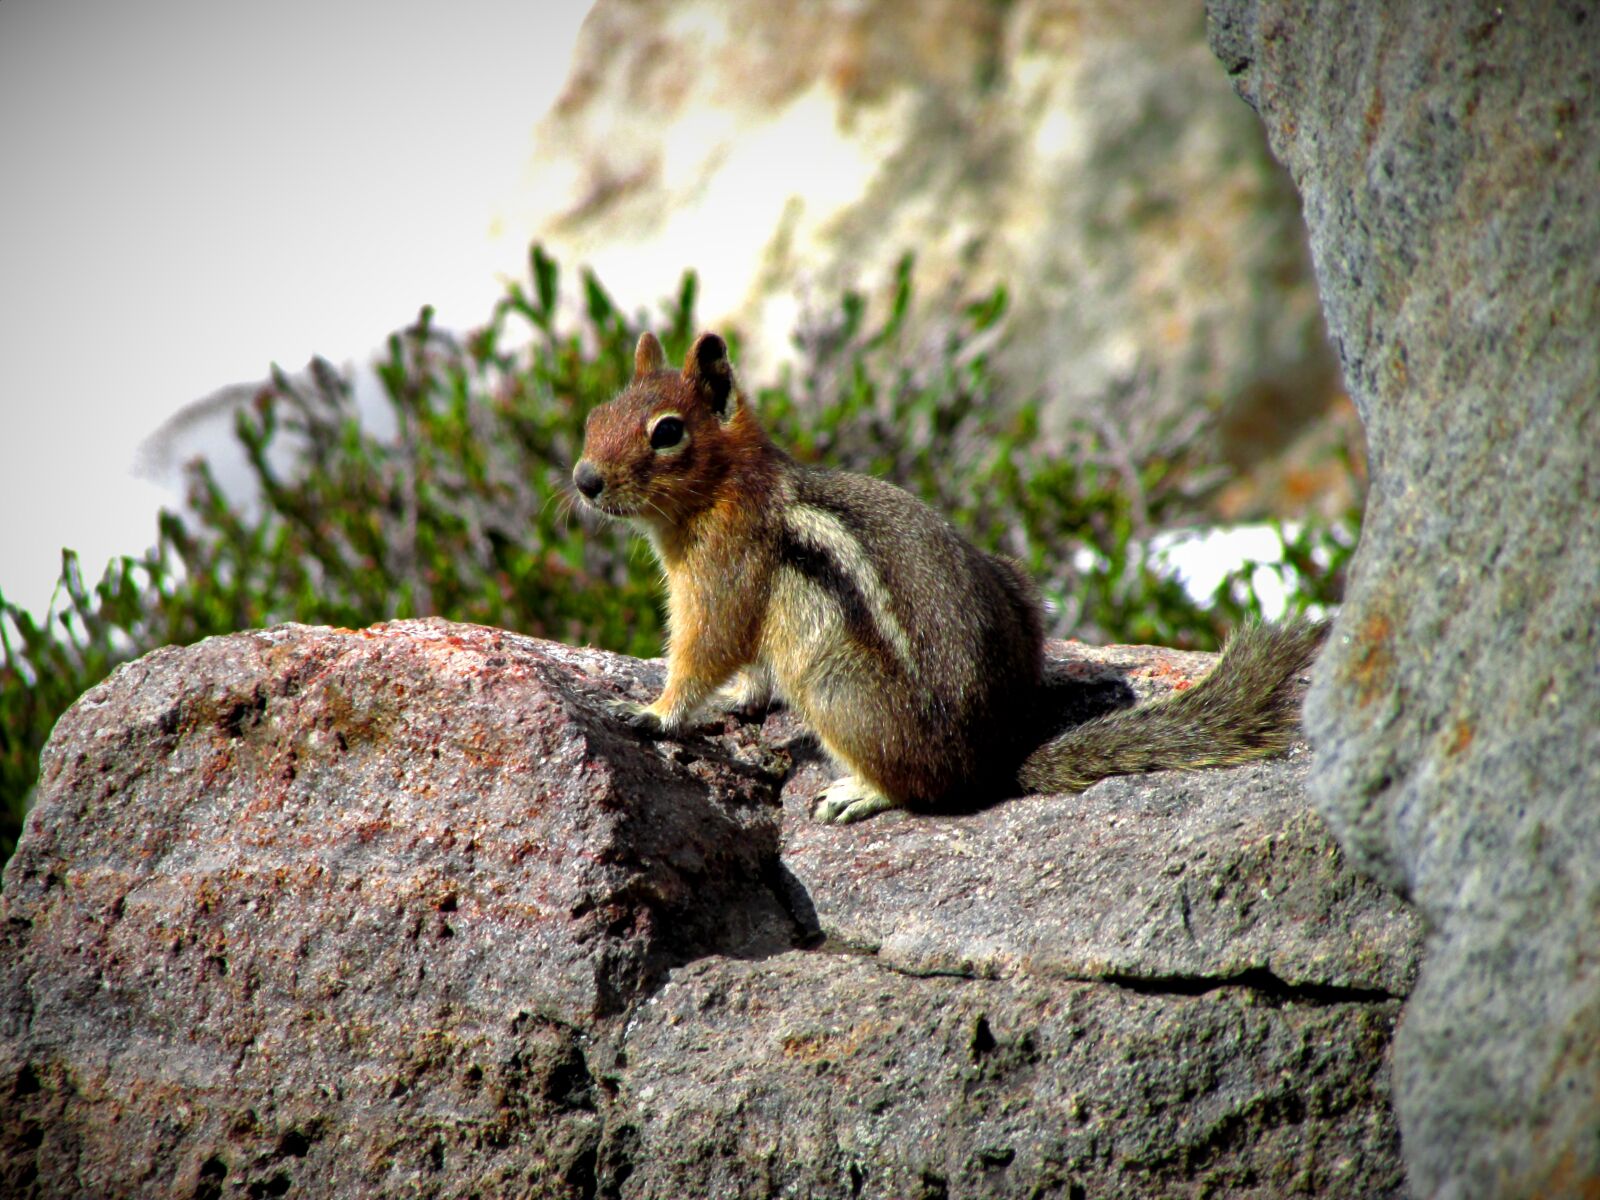 Canon PowerShot SX500 IS sample photo. Ground squirrel, squirrel, nature photography